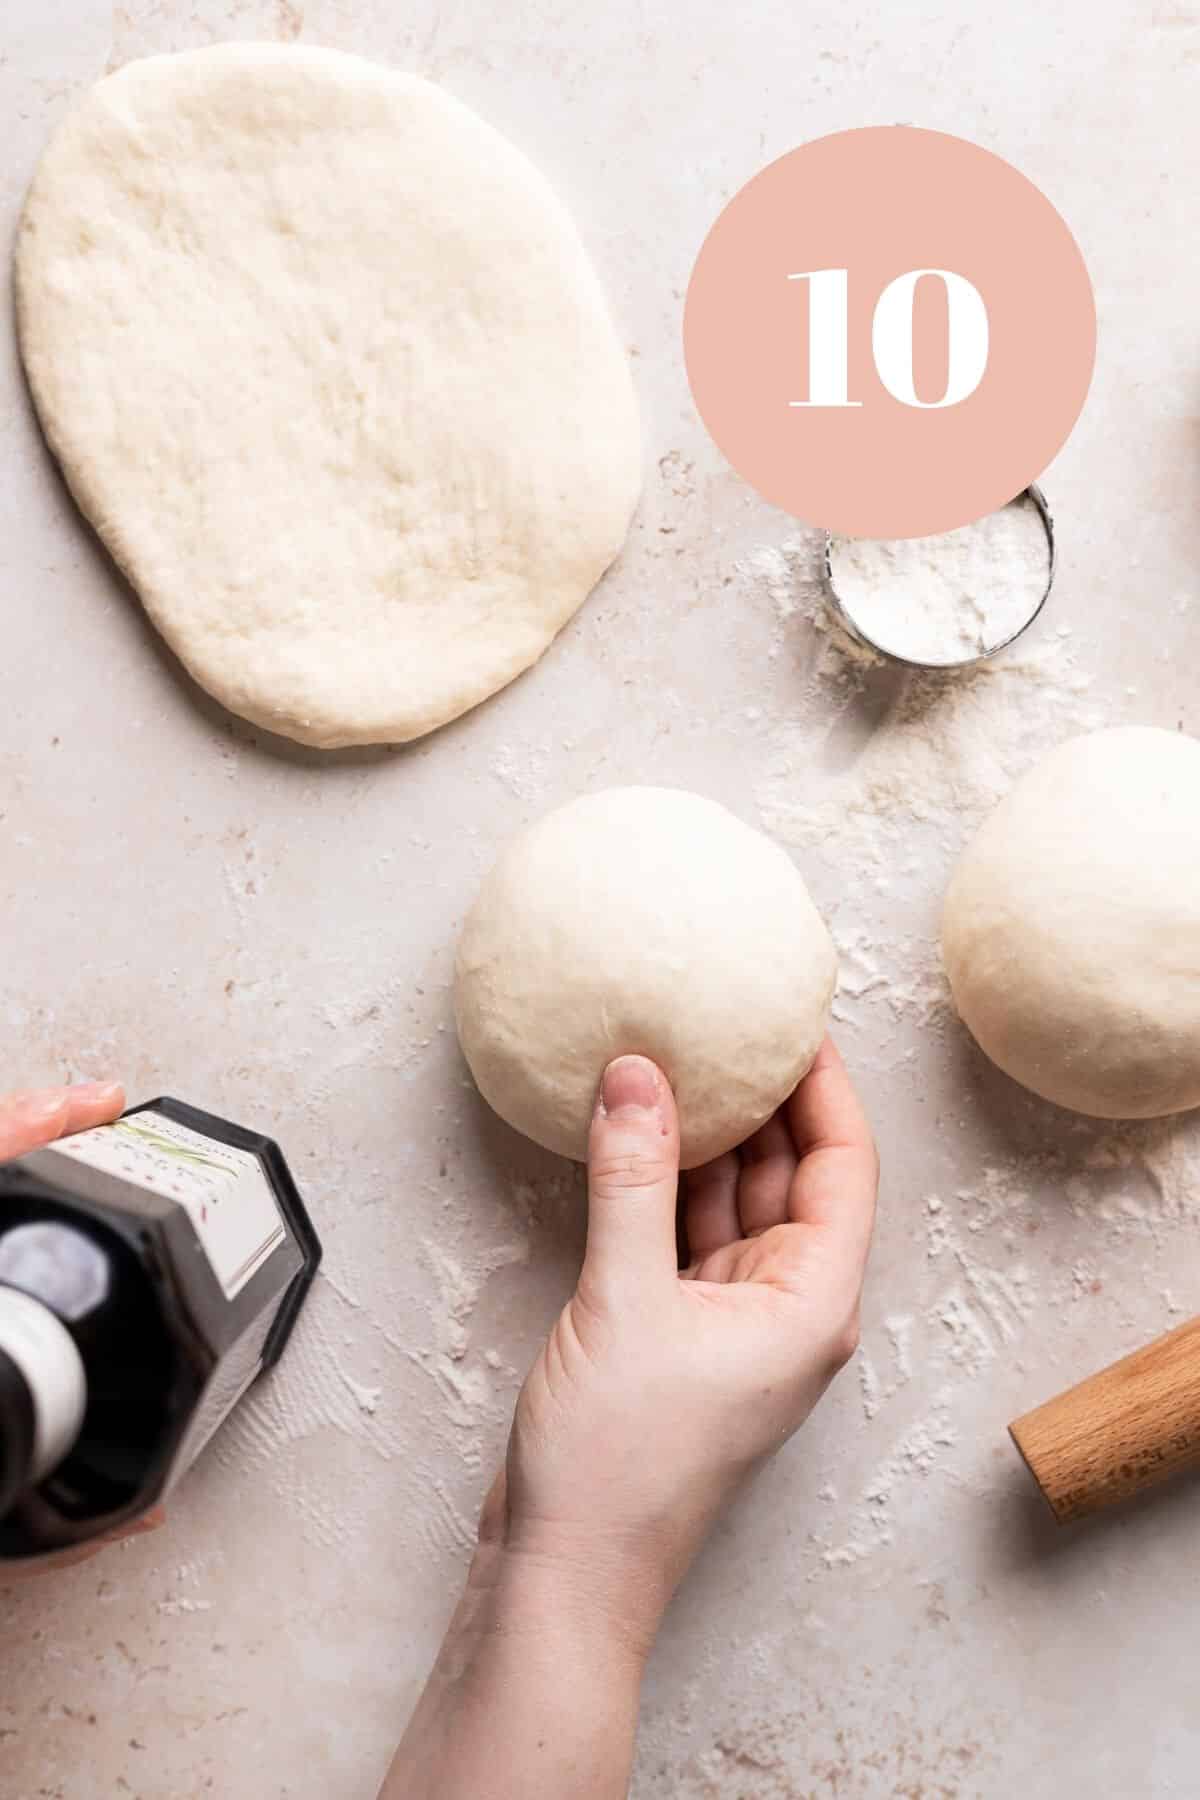 stretching the chewy italian pizza dough balls.